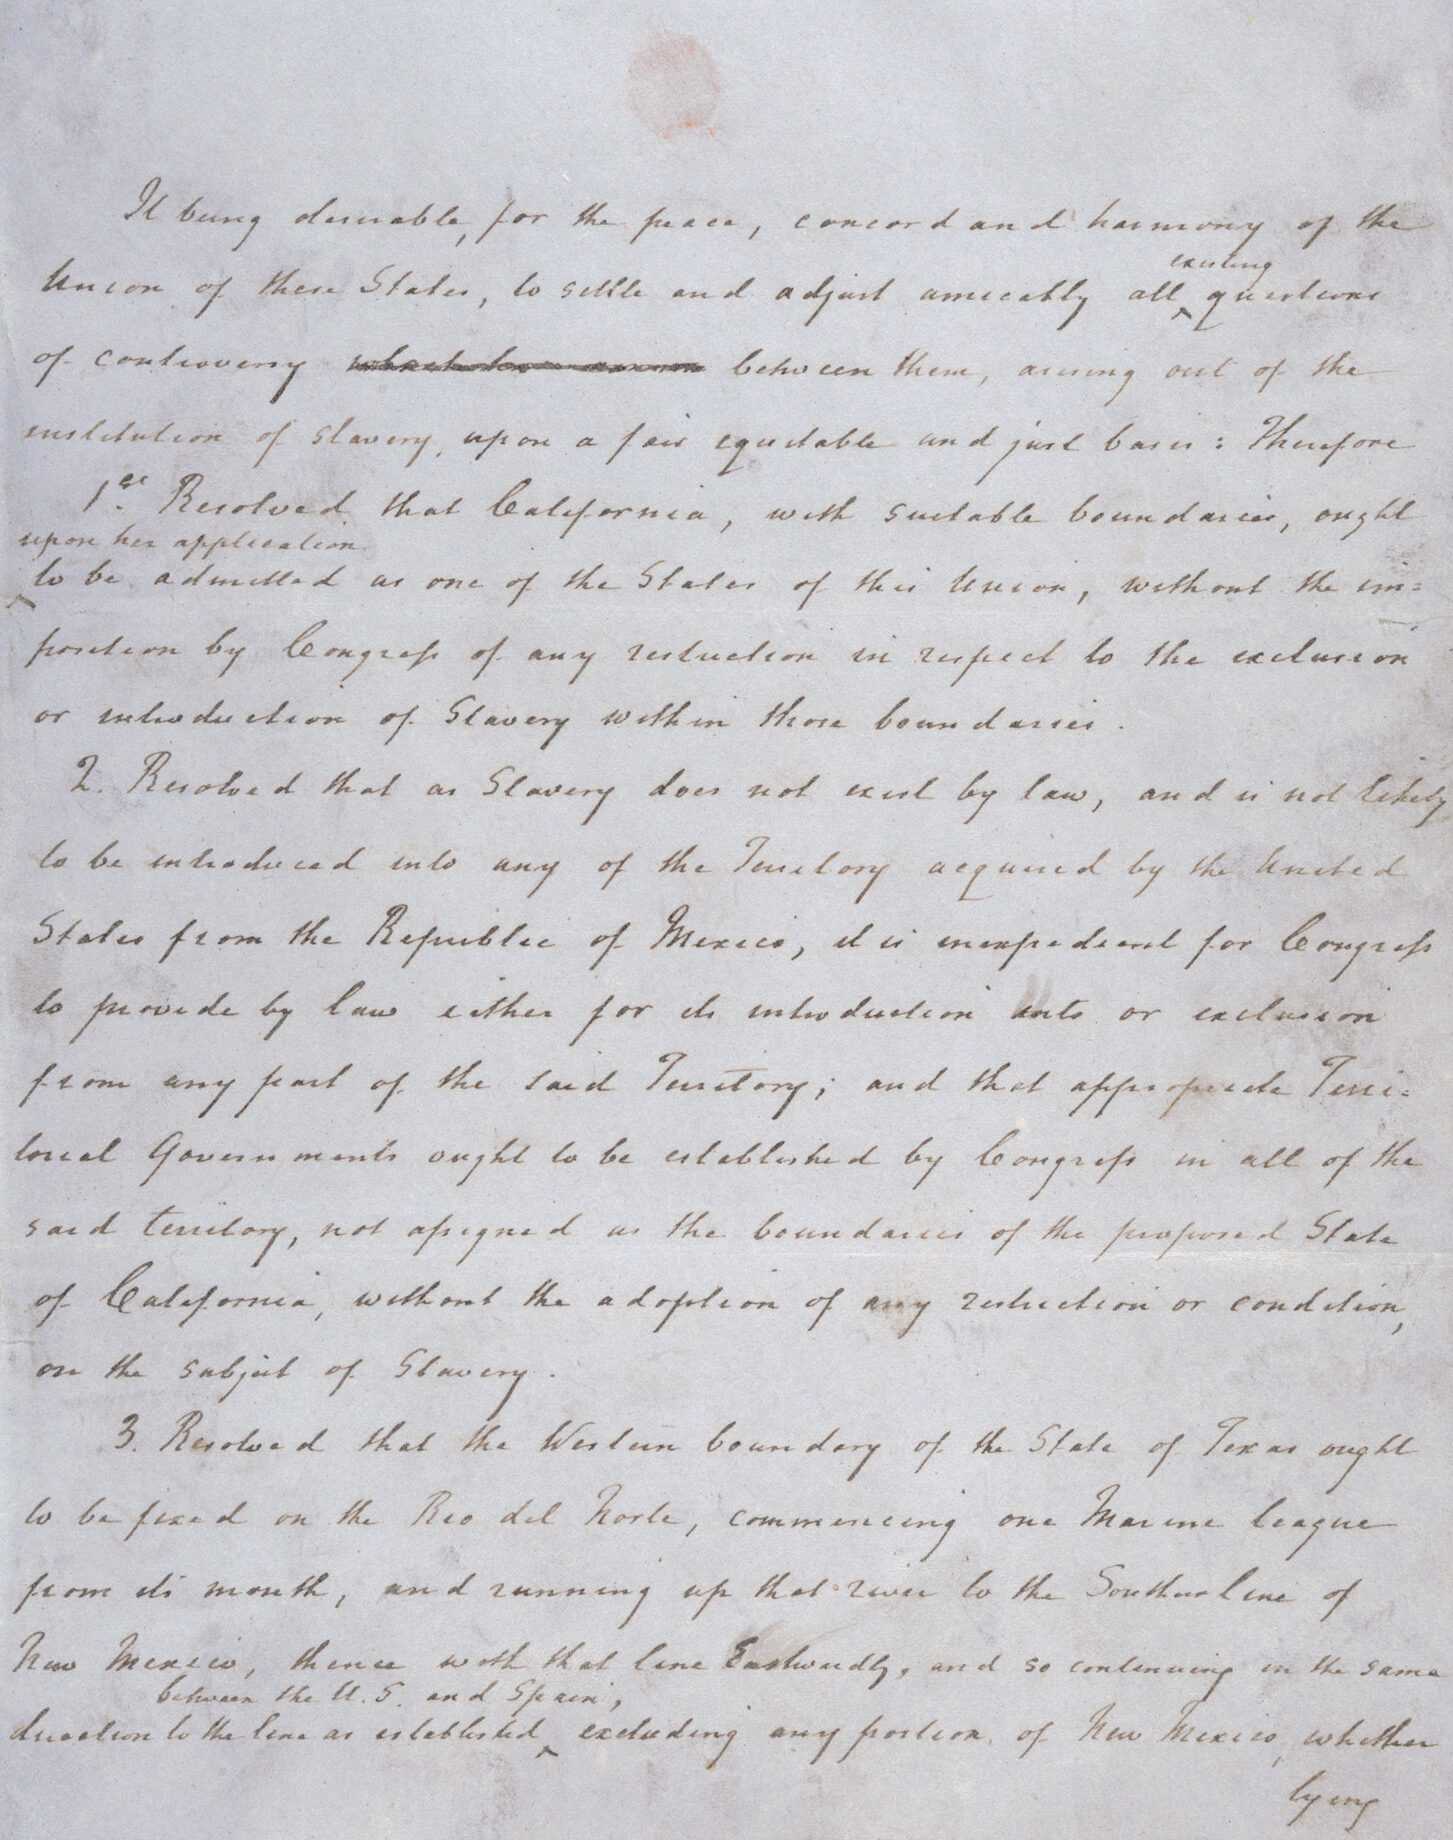 Document showing the Compromise of 1850